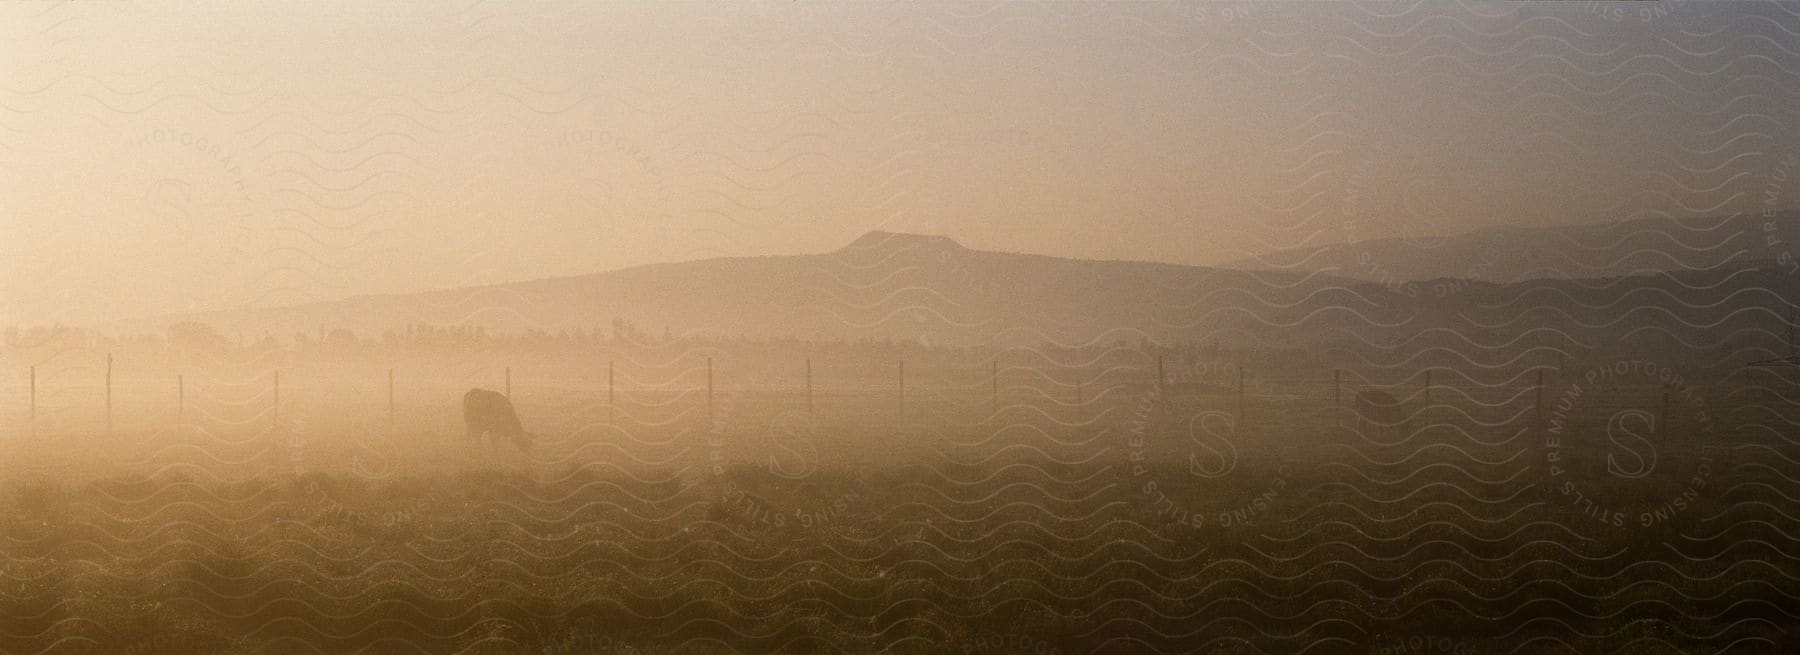 Cows graze in a dusty field in mexico city at dusk with a mountainous landscape and a misty sky in the background